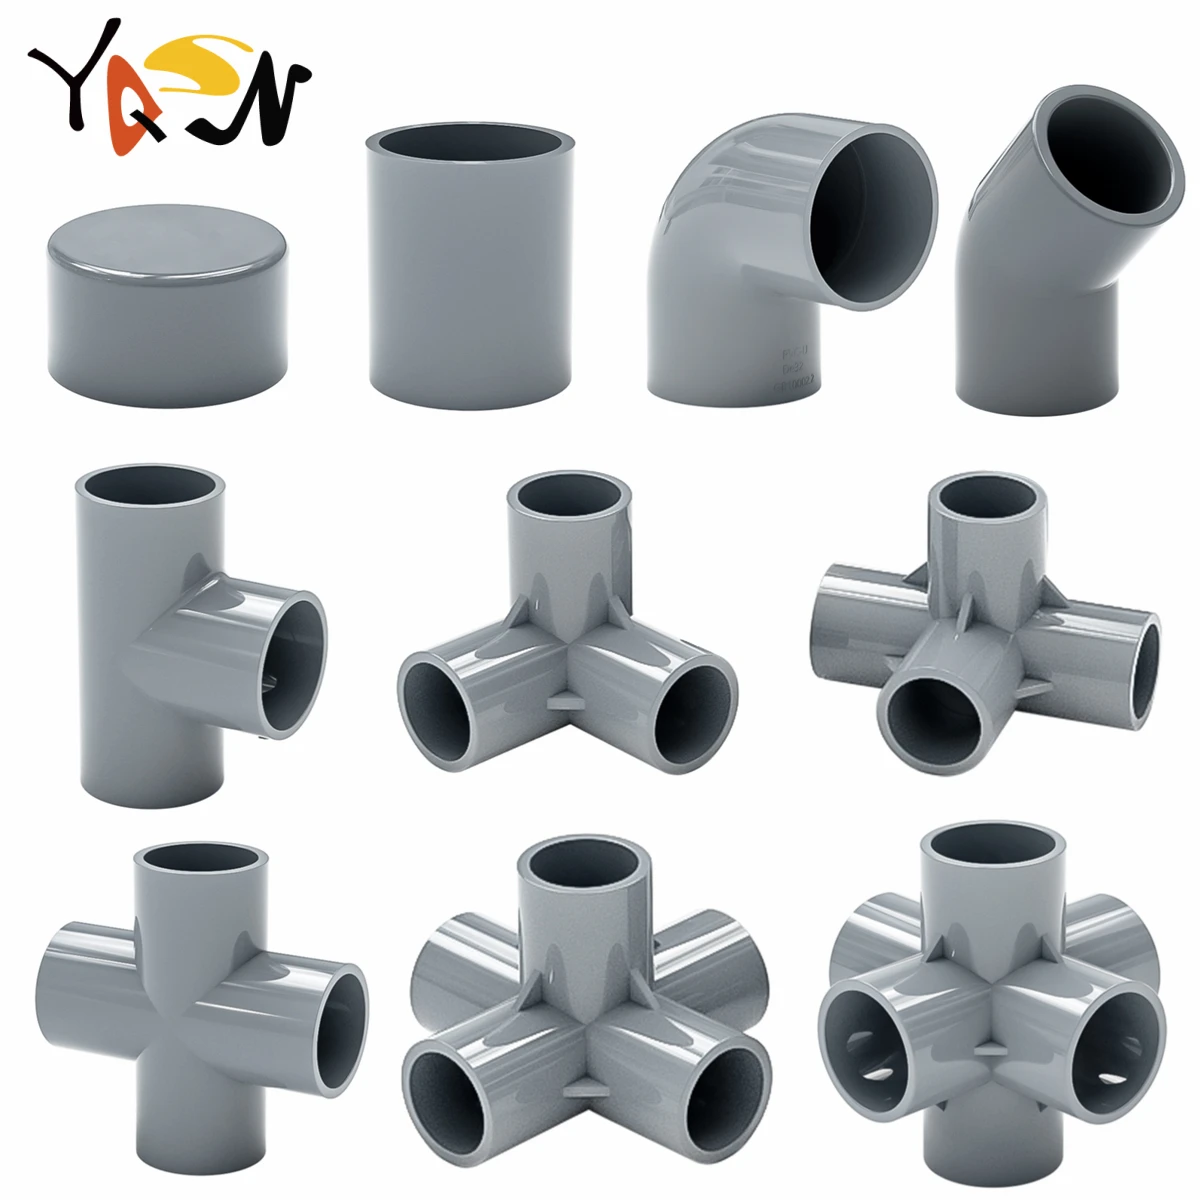 Grey 20/25/32mm PVC Pipe Fittings 3/4/5/6 Ways DIY Straight Elbow Equal Tee Connectors Plastic Joint Tube Coupler Adapter